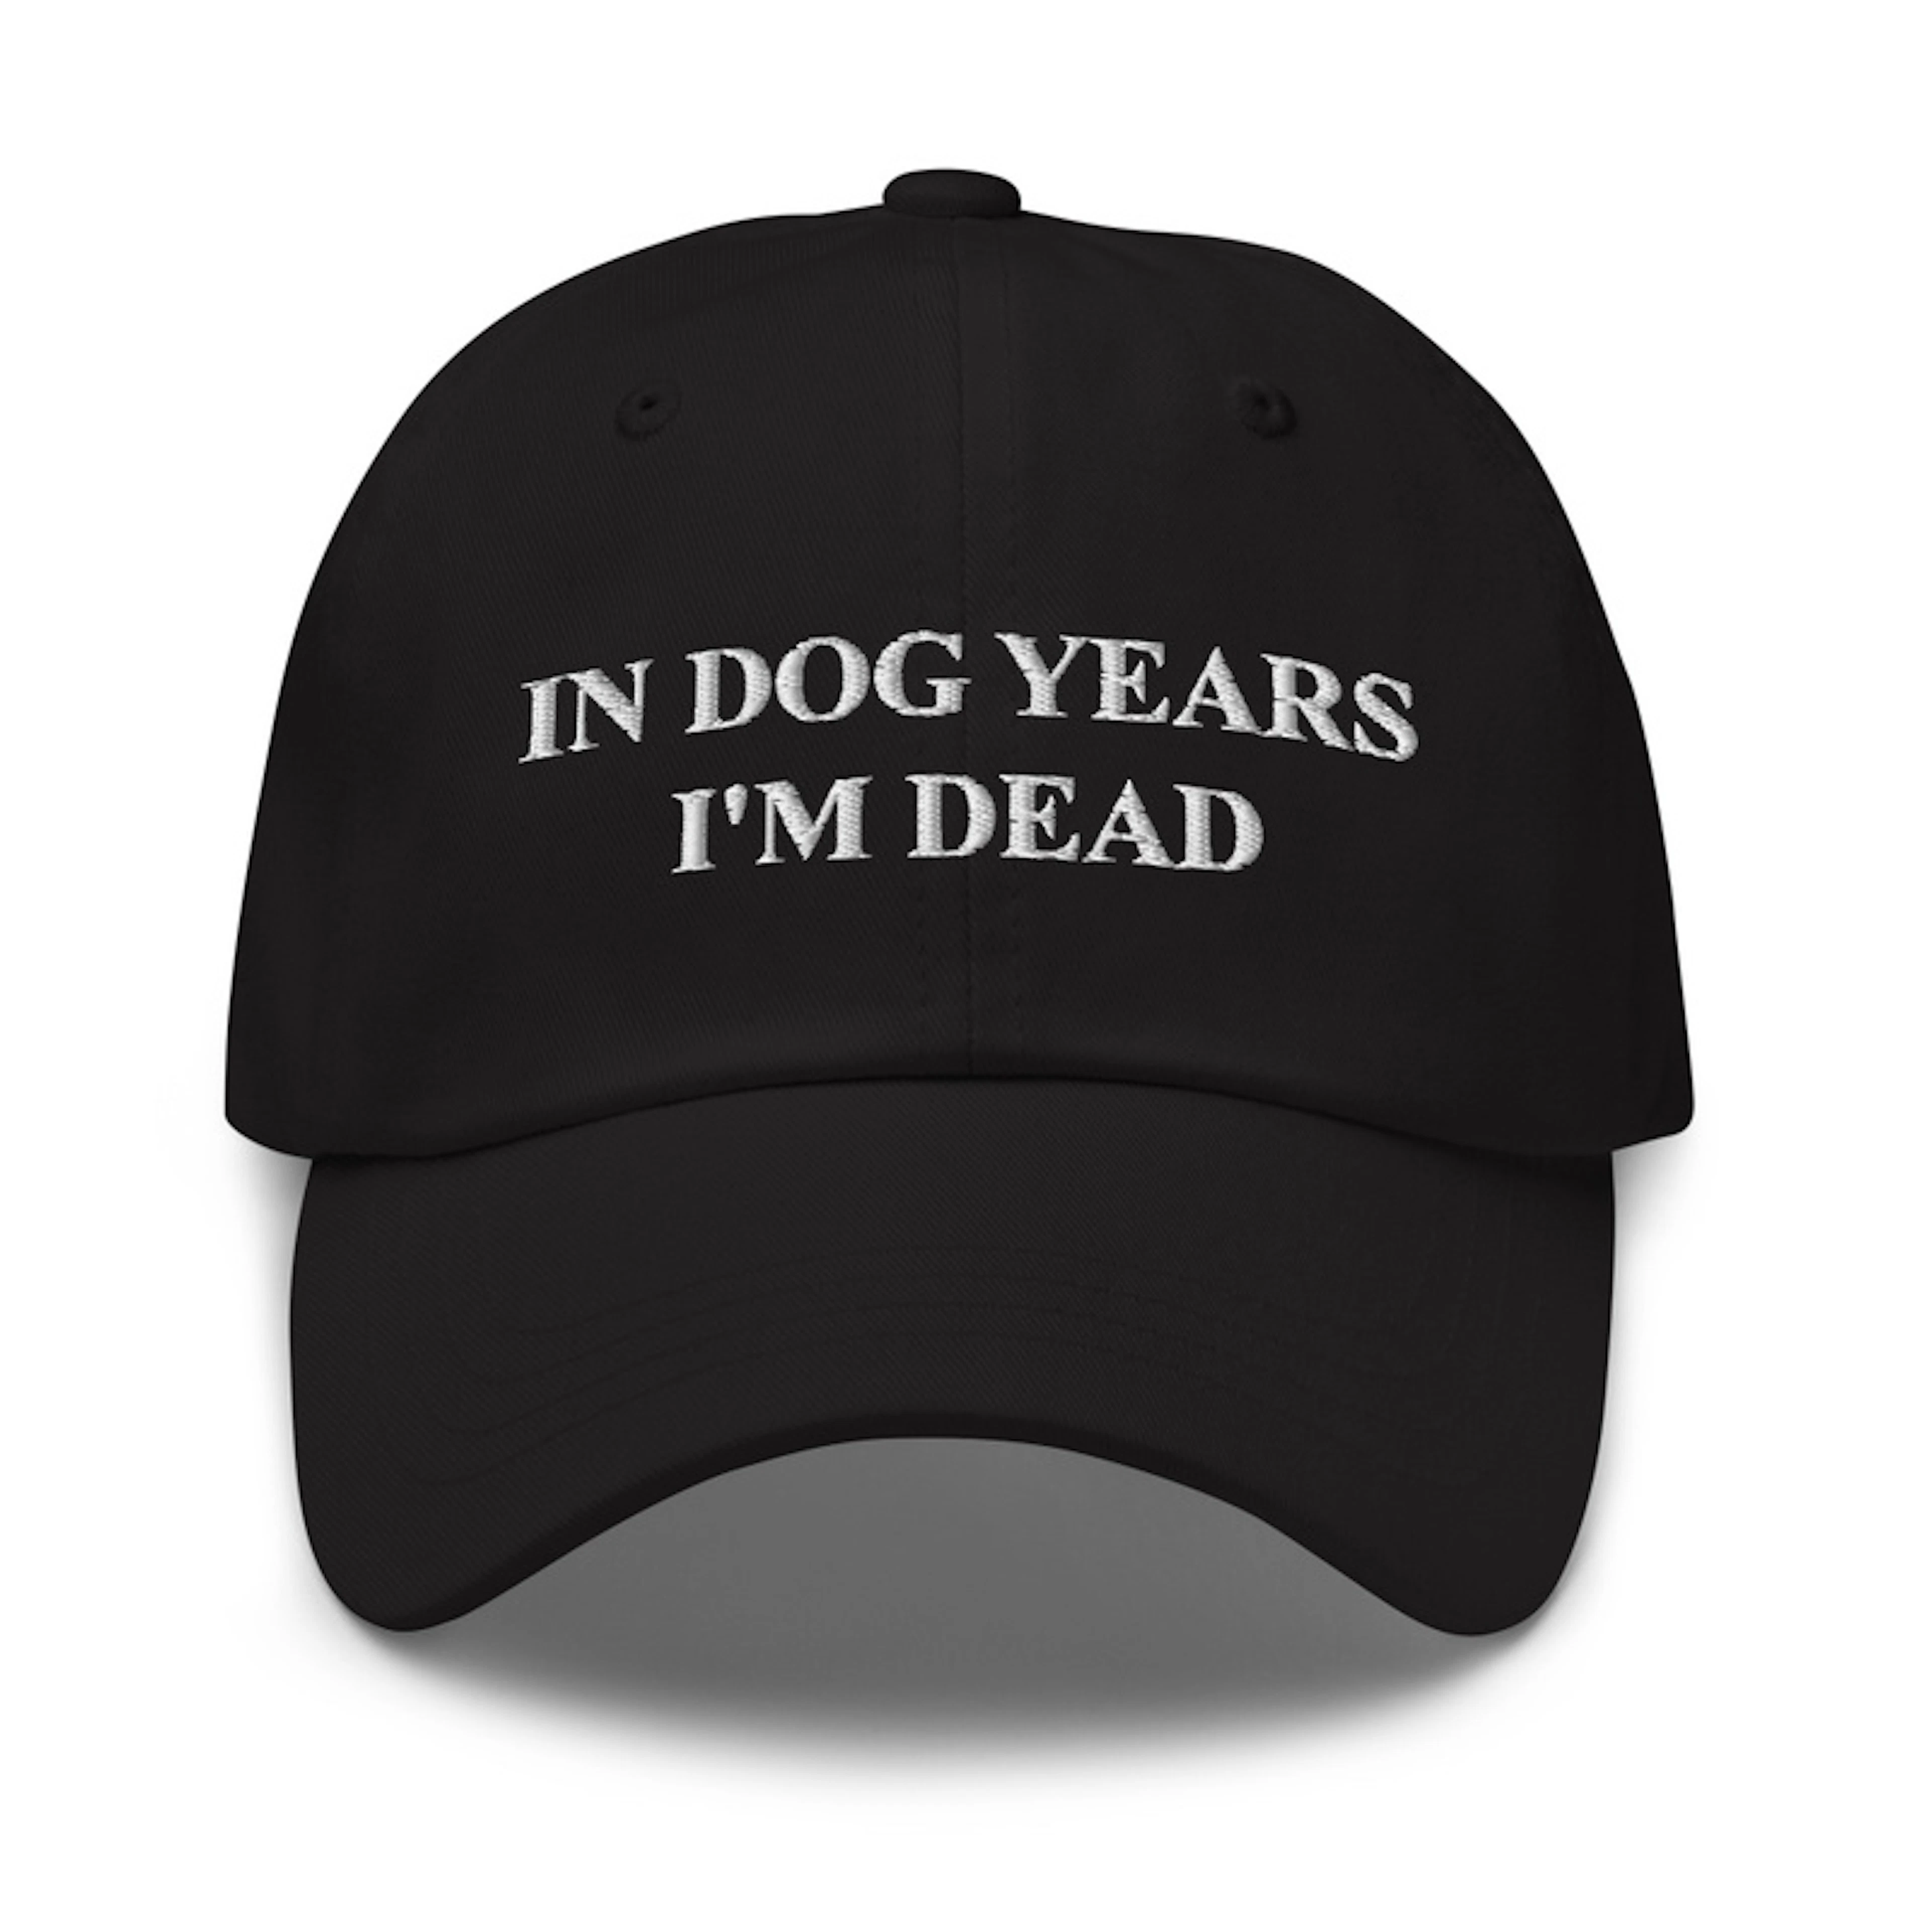 IN DOG YEARS I'M DEAD